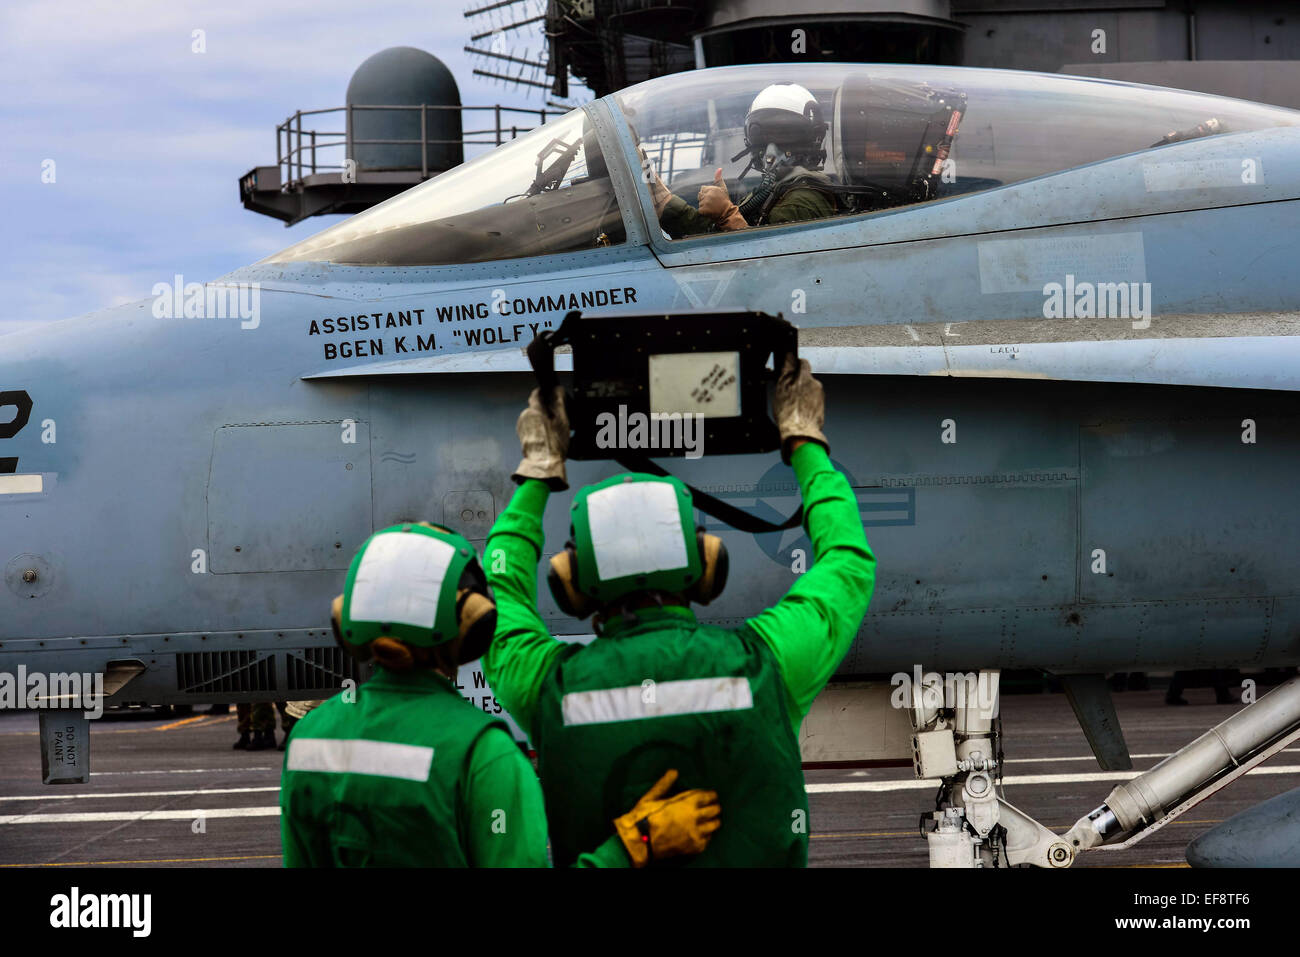 A US Navy pilot confirms the weight of his F/A-18 Hornet fighter aircraft prior to launch from the flight deck of the nuclear Nimitz-class aircraft carrier USS John C. Stennis January 28, 2015 in the East China Sea. Stock Photo